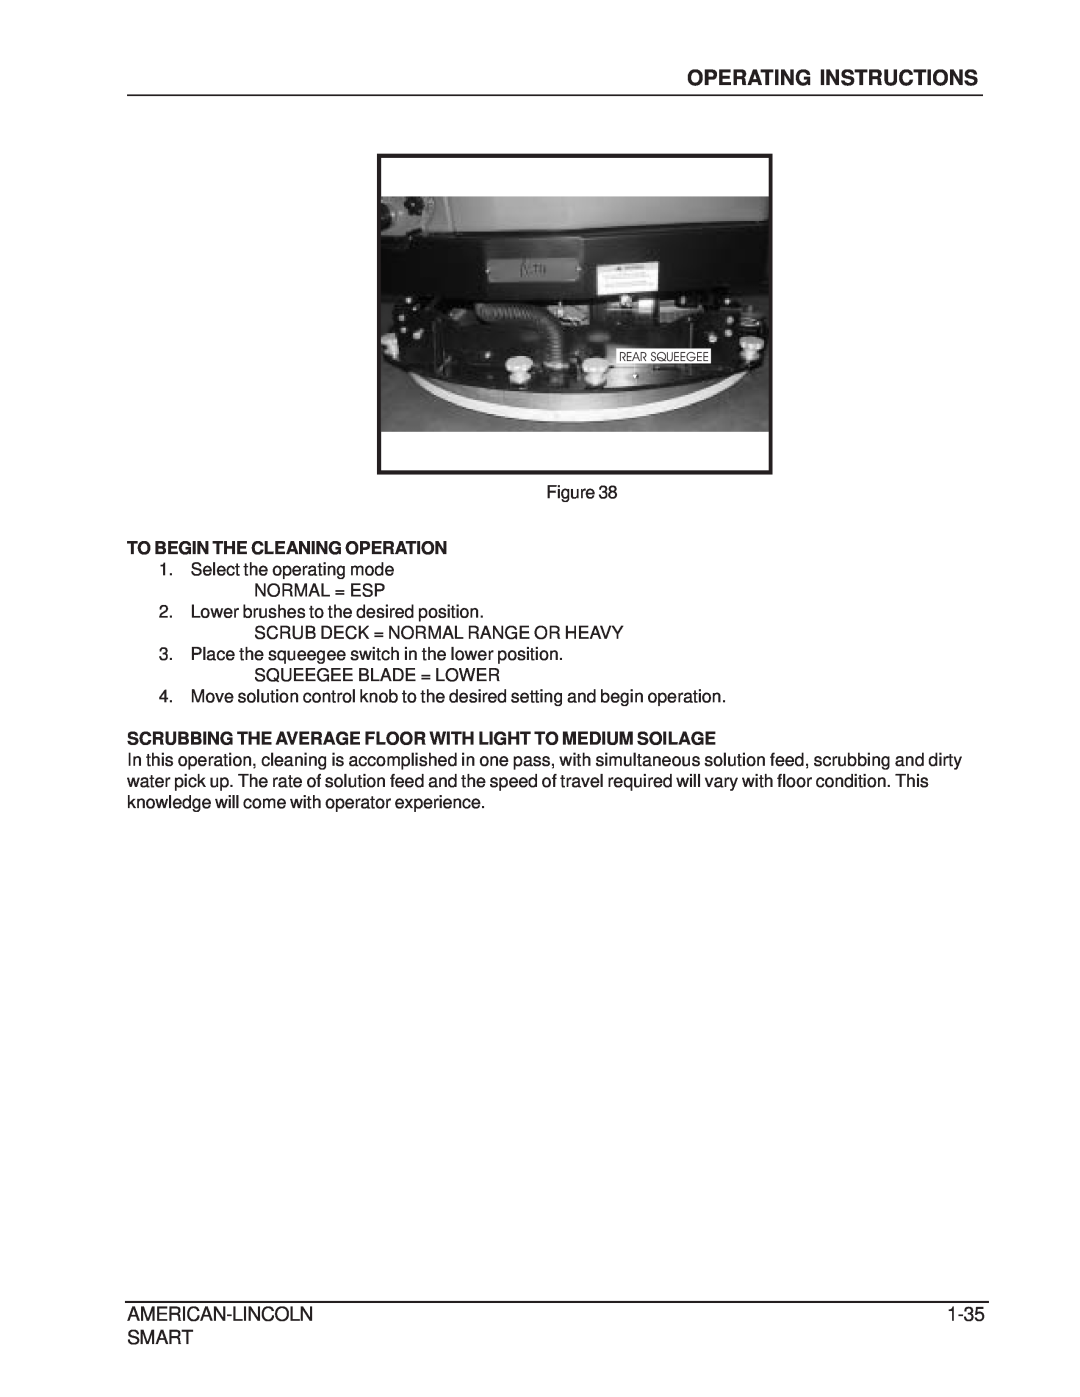 Nilfisk-ALTO 692003 manual Operating Instructions, American-Lincoln, 1-35, Smart, To Begin The Cleaning Operation 